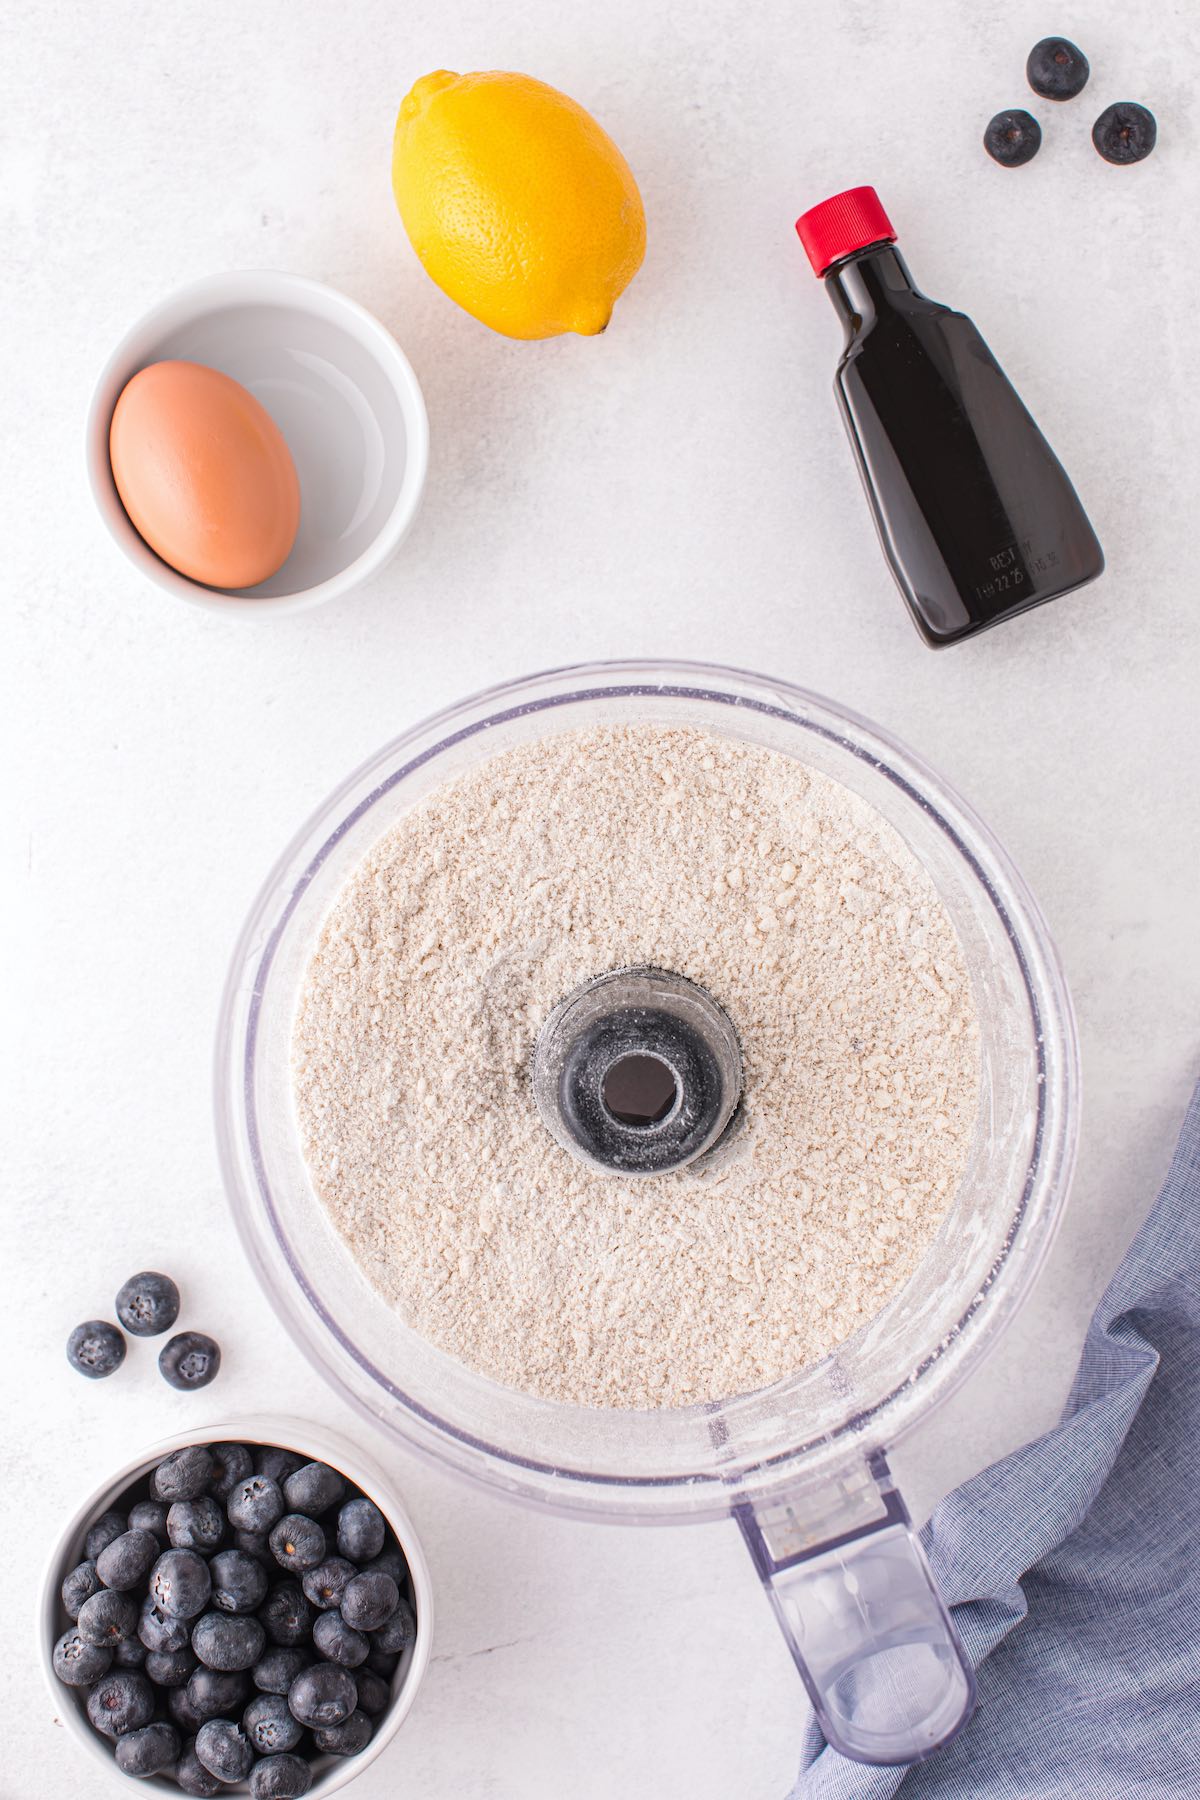 mix dry ingredients in food processor